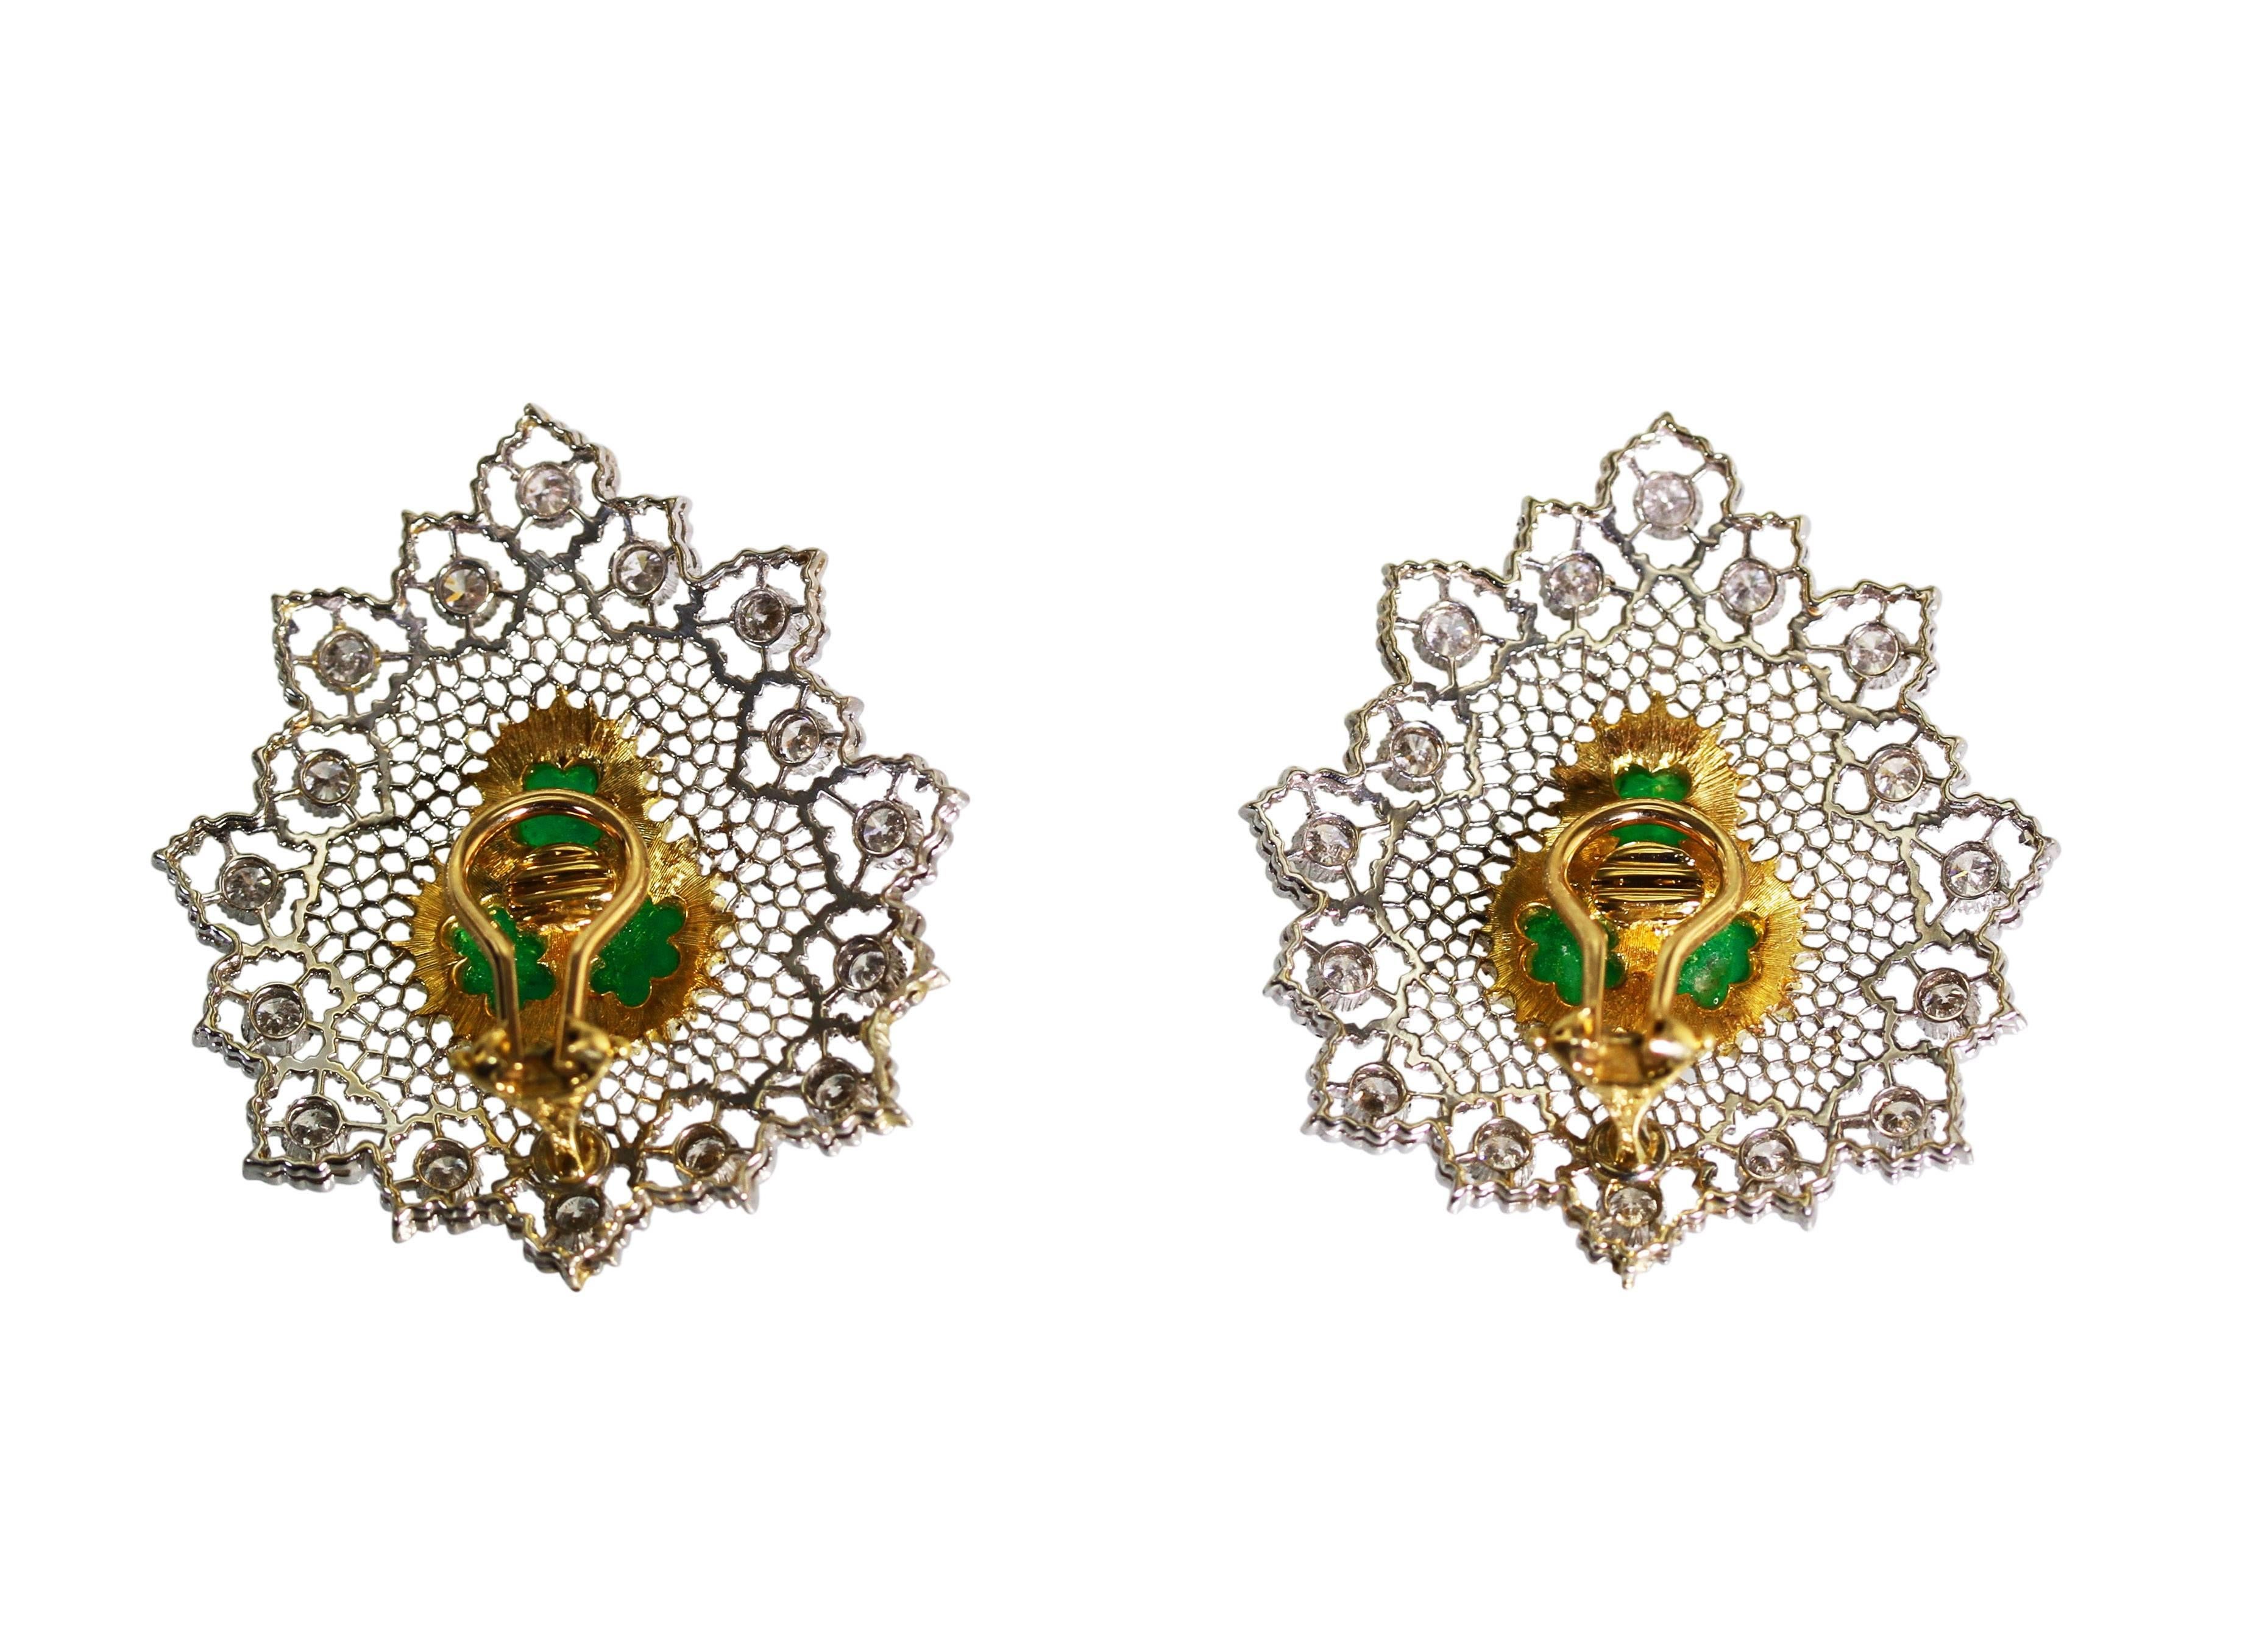 Made by the incredible Italian jewelry firm Buccellati, these earclips feature vivid green cabochon emeralds set within lace-like frames of yellow and white gold set with round diamonds weighing a total of approximately 2.00 carats.  A beautiful